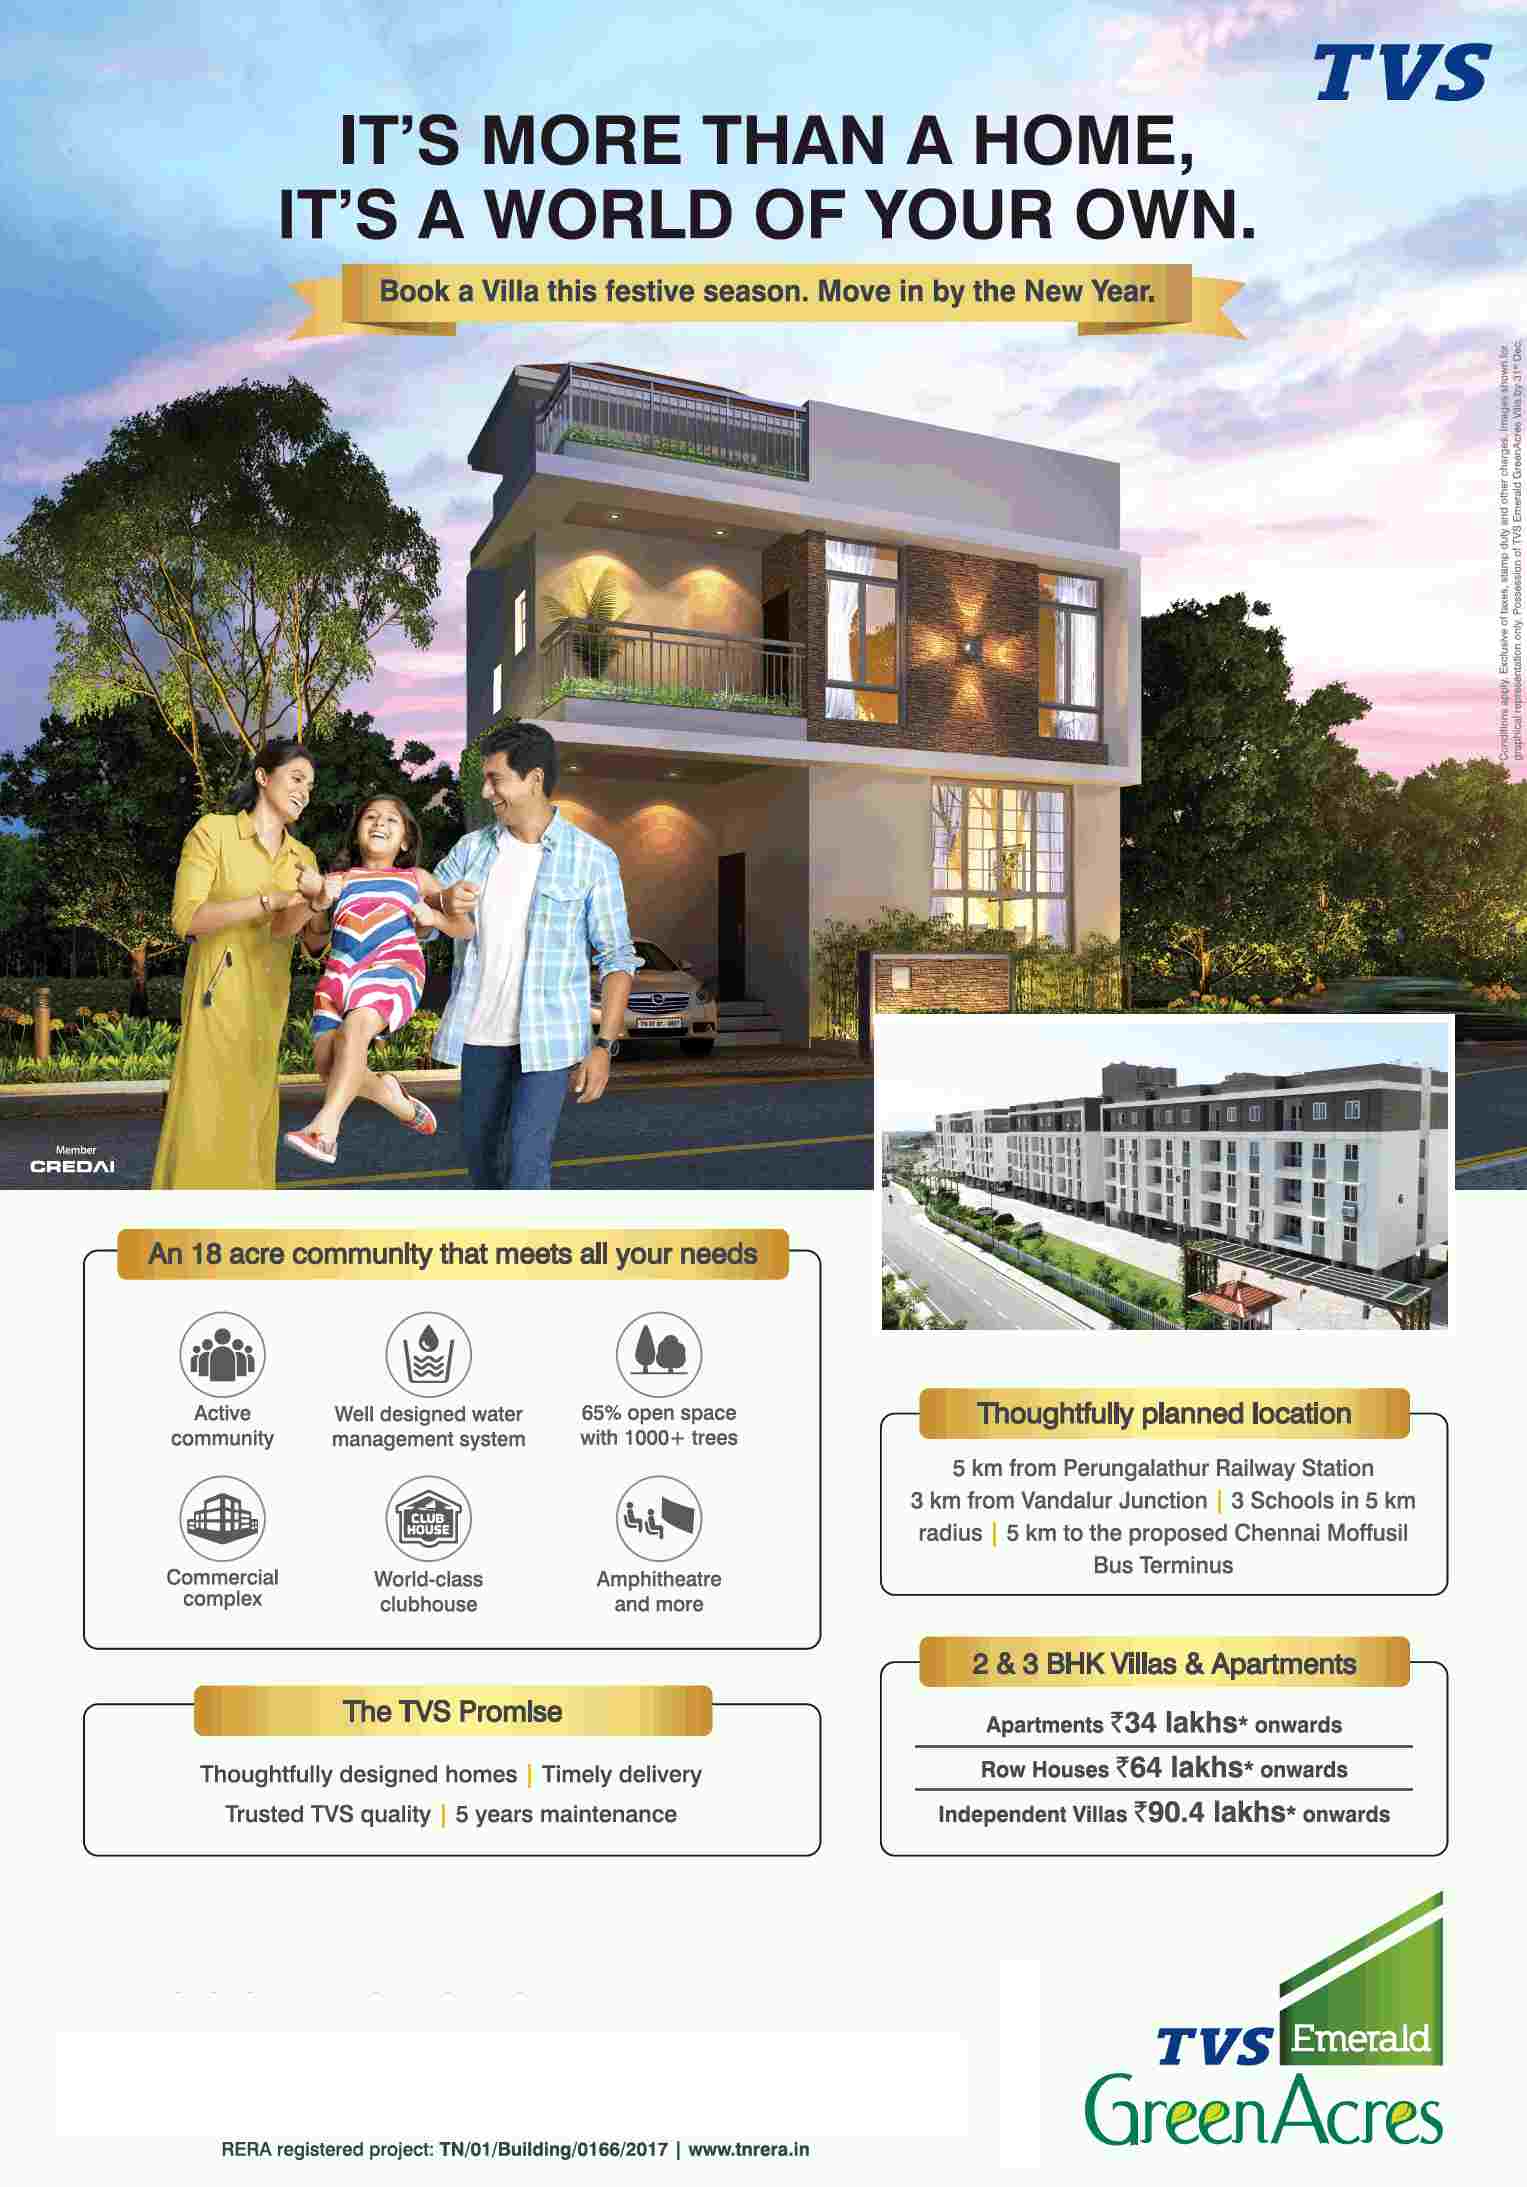 Live in 18 acre community that meets all your needs at TVS Emerald Green Acres in Chennai